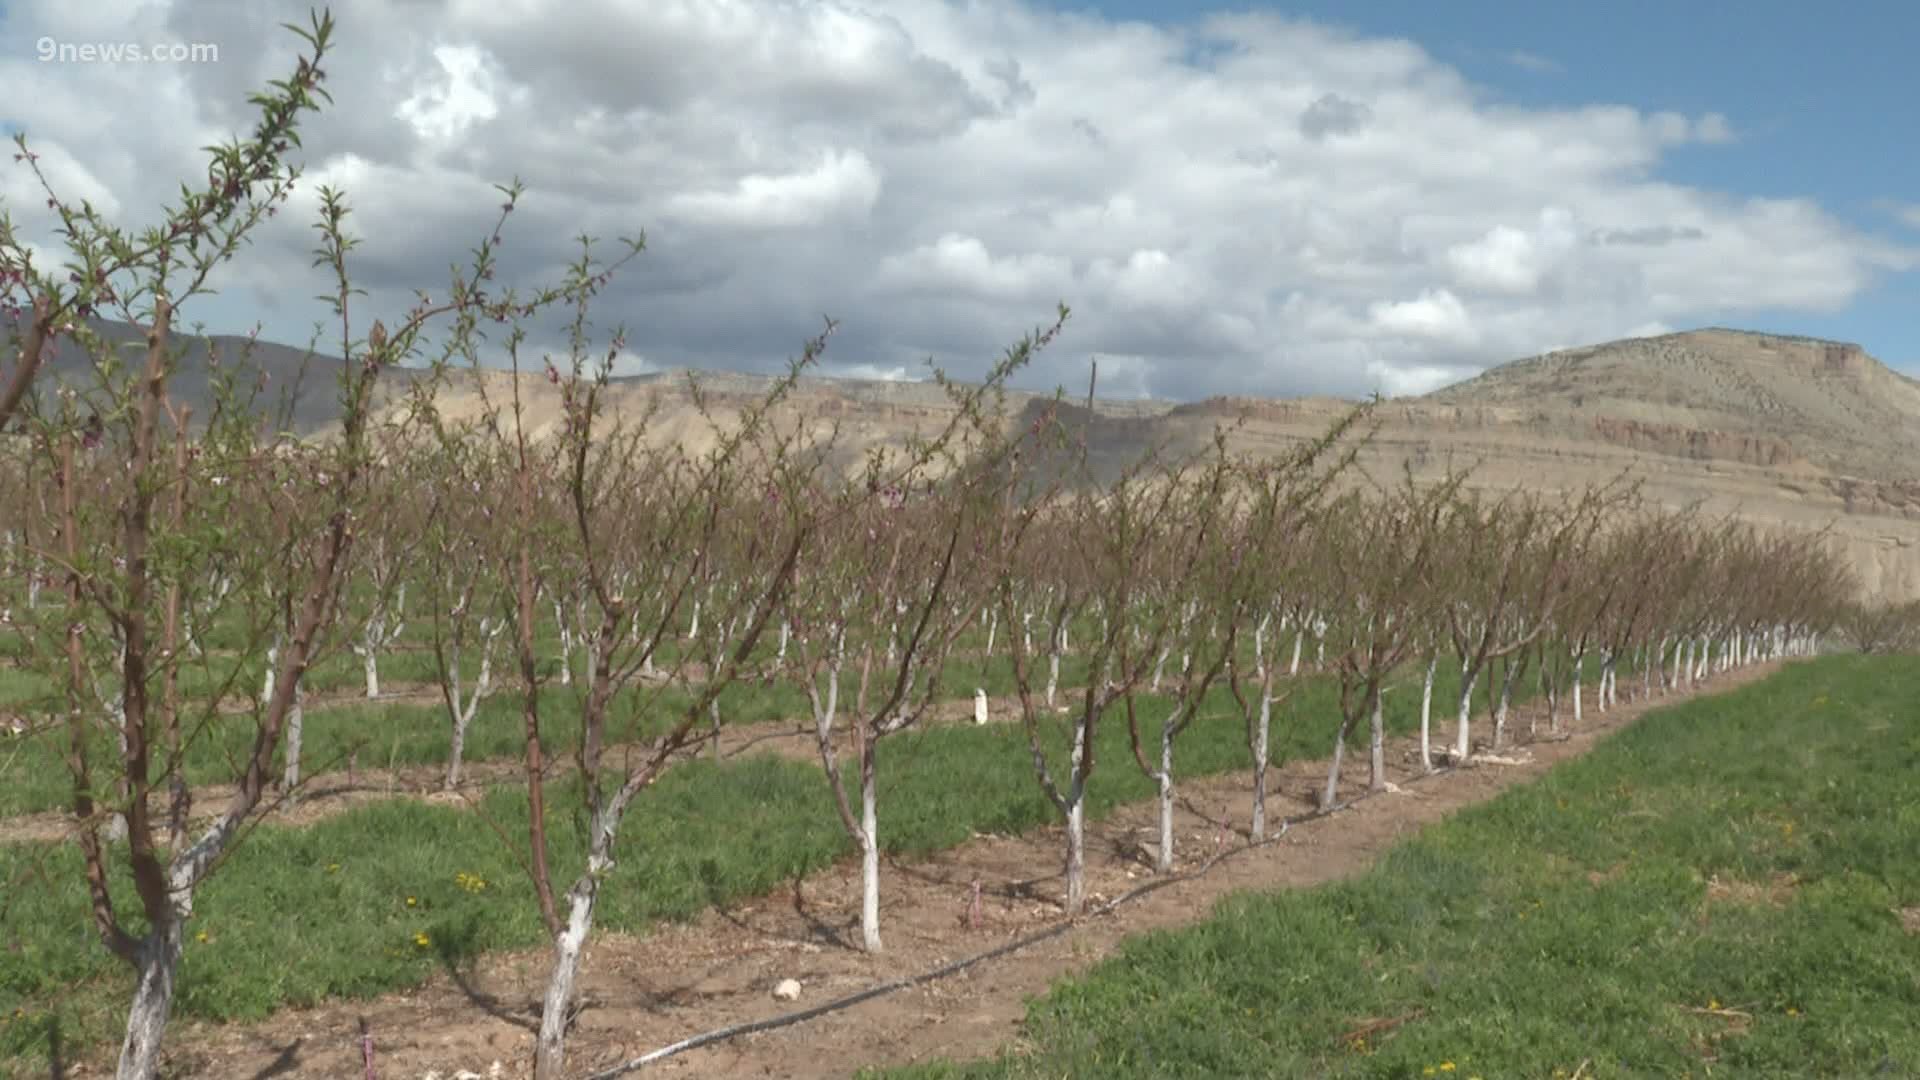 Temperatures dropped to 19 degrees two weeks ago and damaged peach crops on the western slope. One farm estimates they lost 90% of their crop.